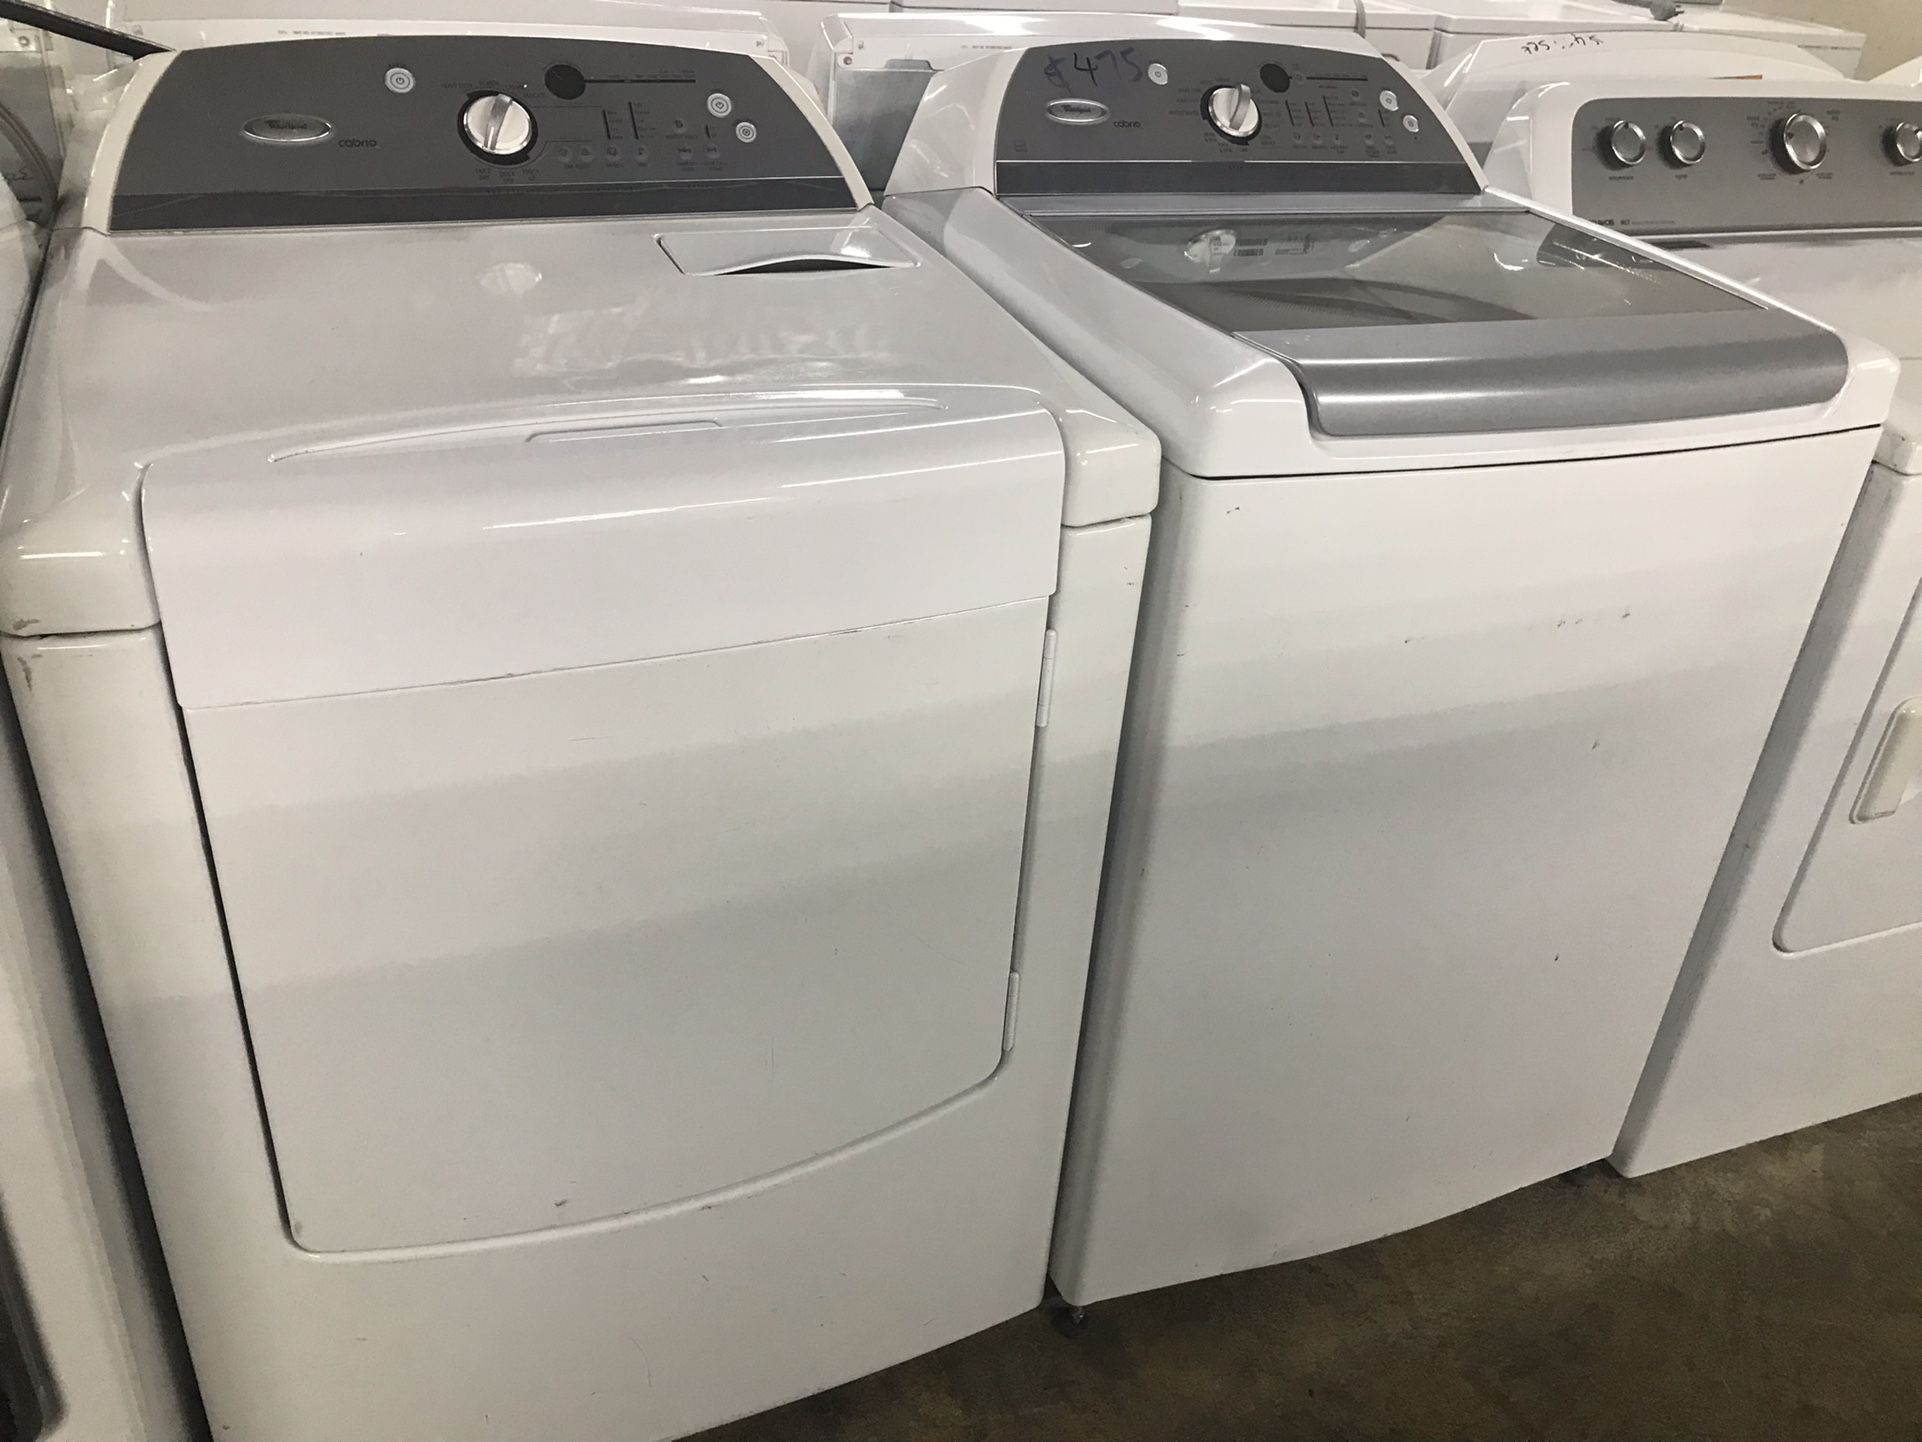 Whirlpool Cabrio Washer And Dryer Set!!